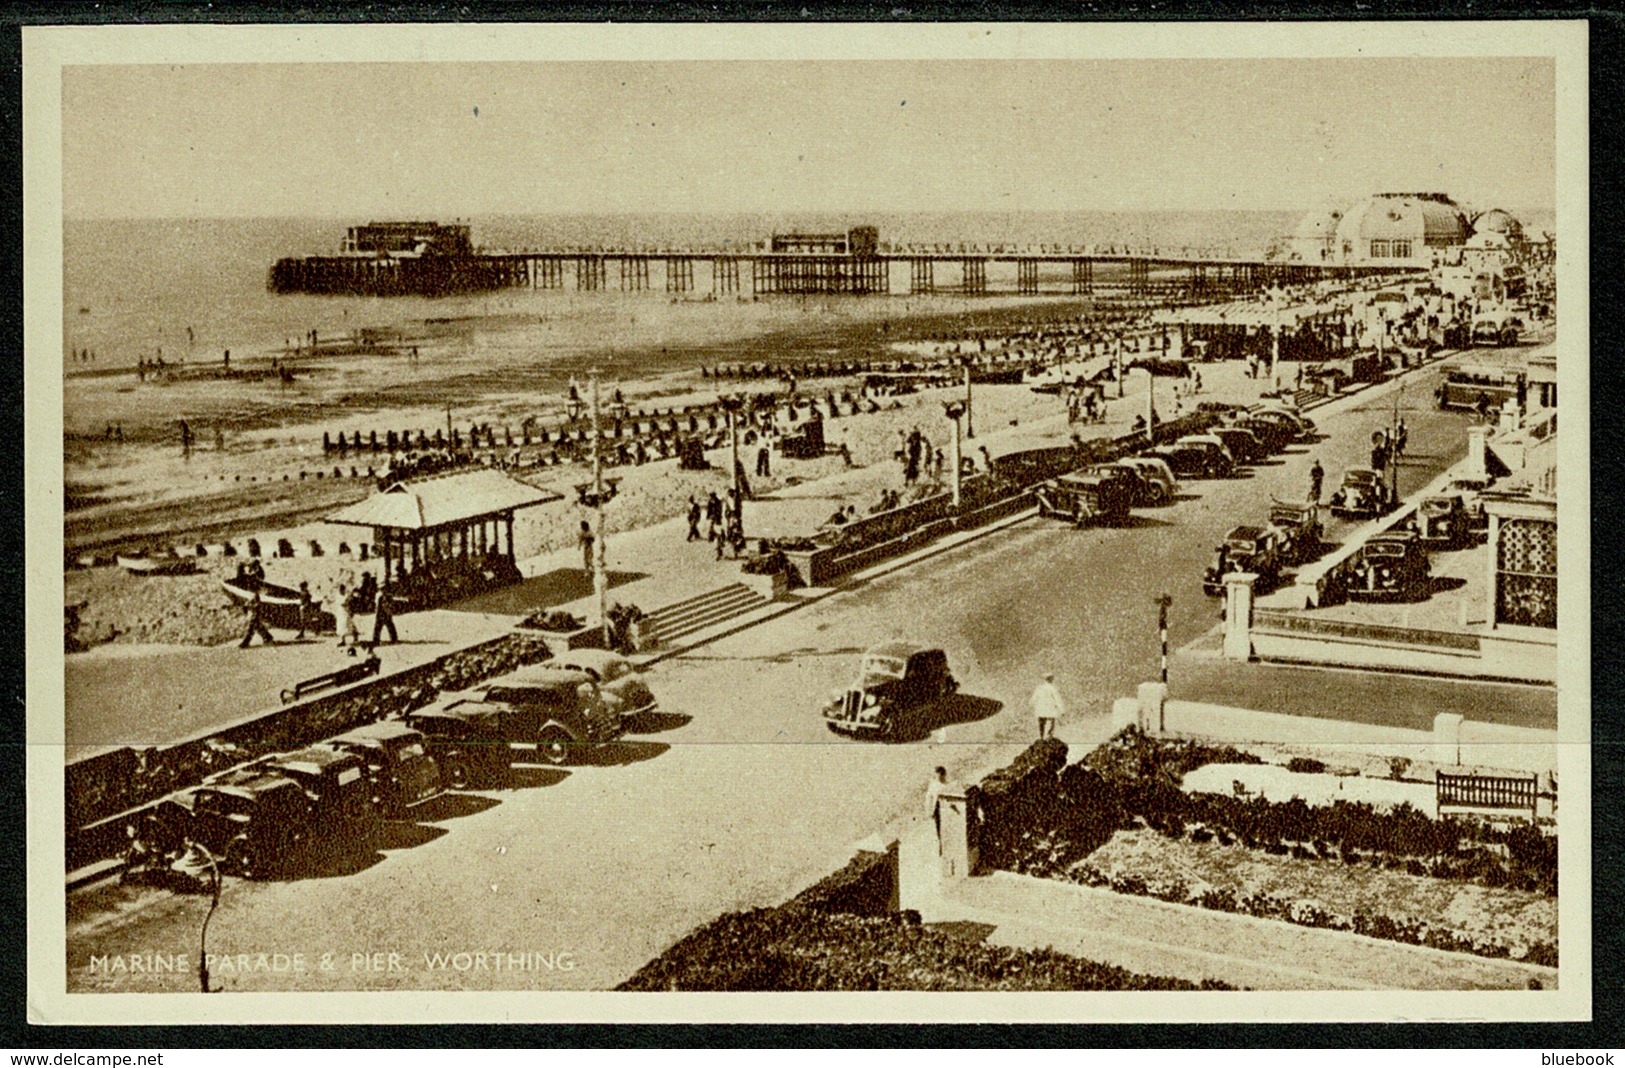 Ref 1246 - Postcard - Cars At Marine Parade & Pier - Worthing Sussex - Worthing